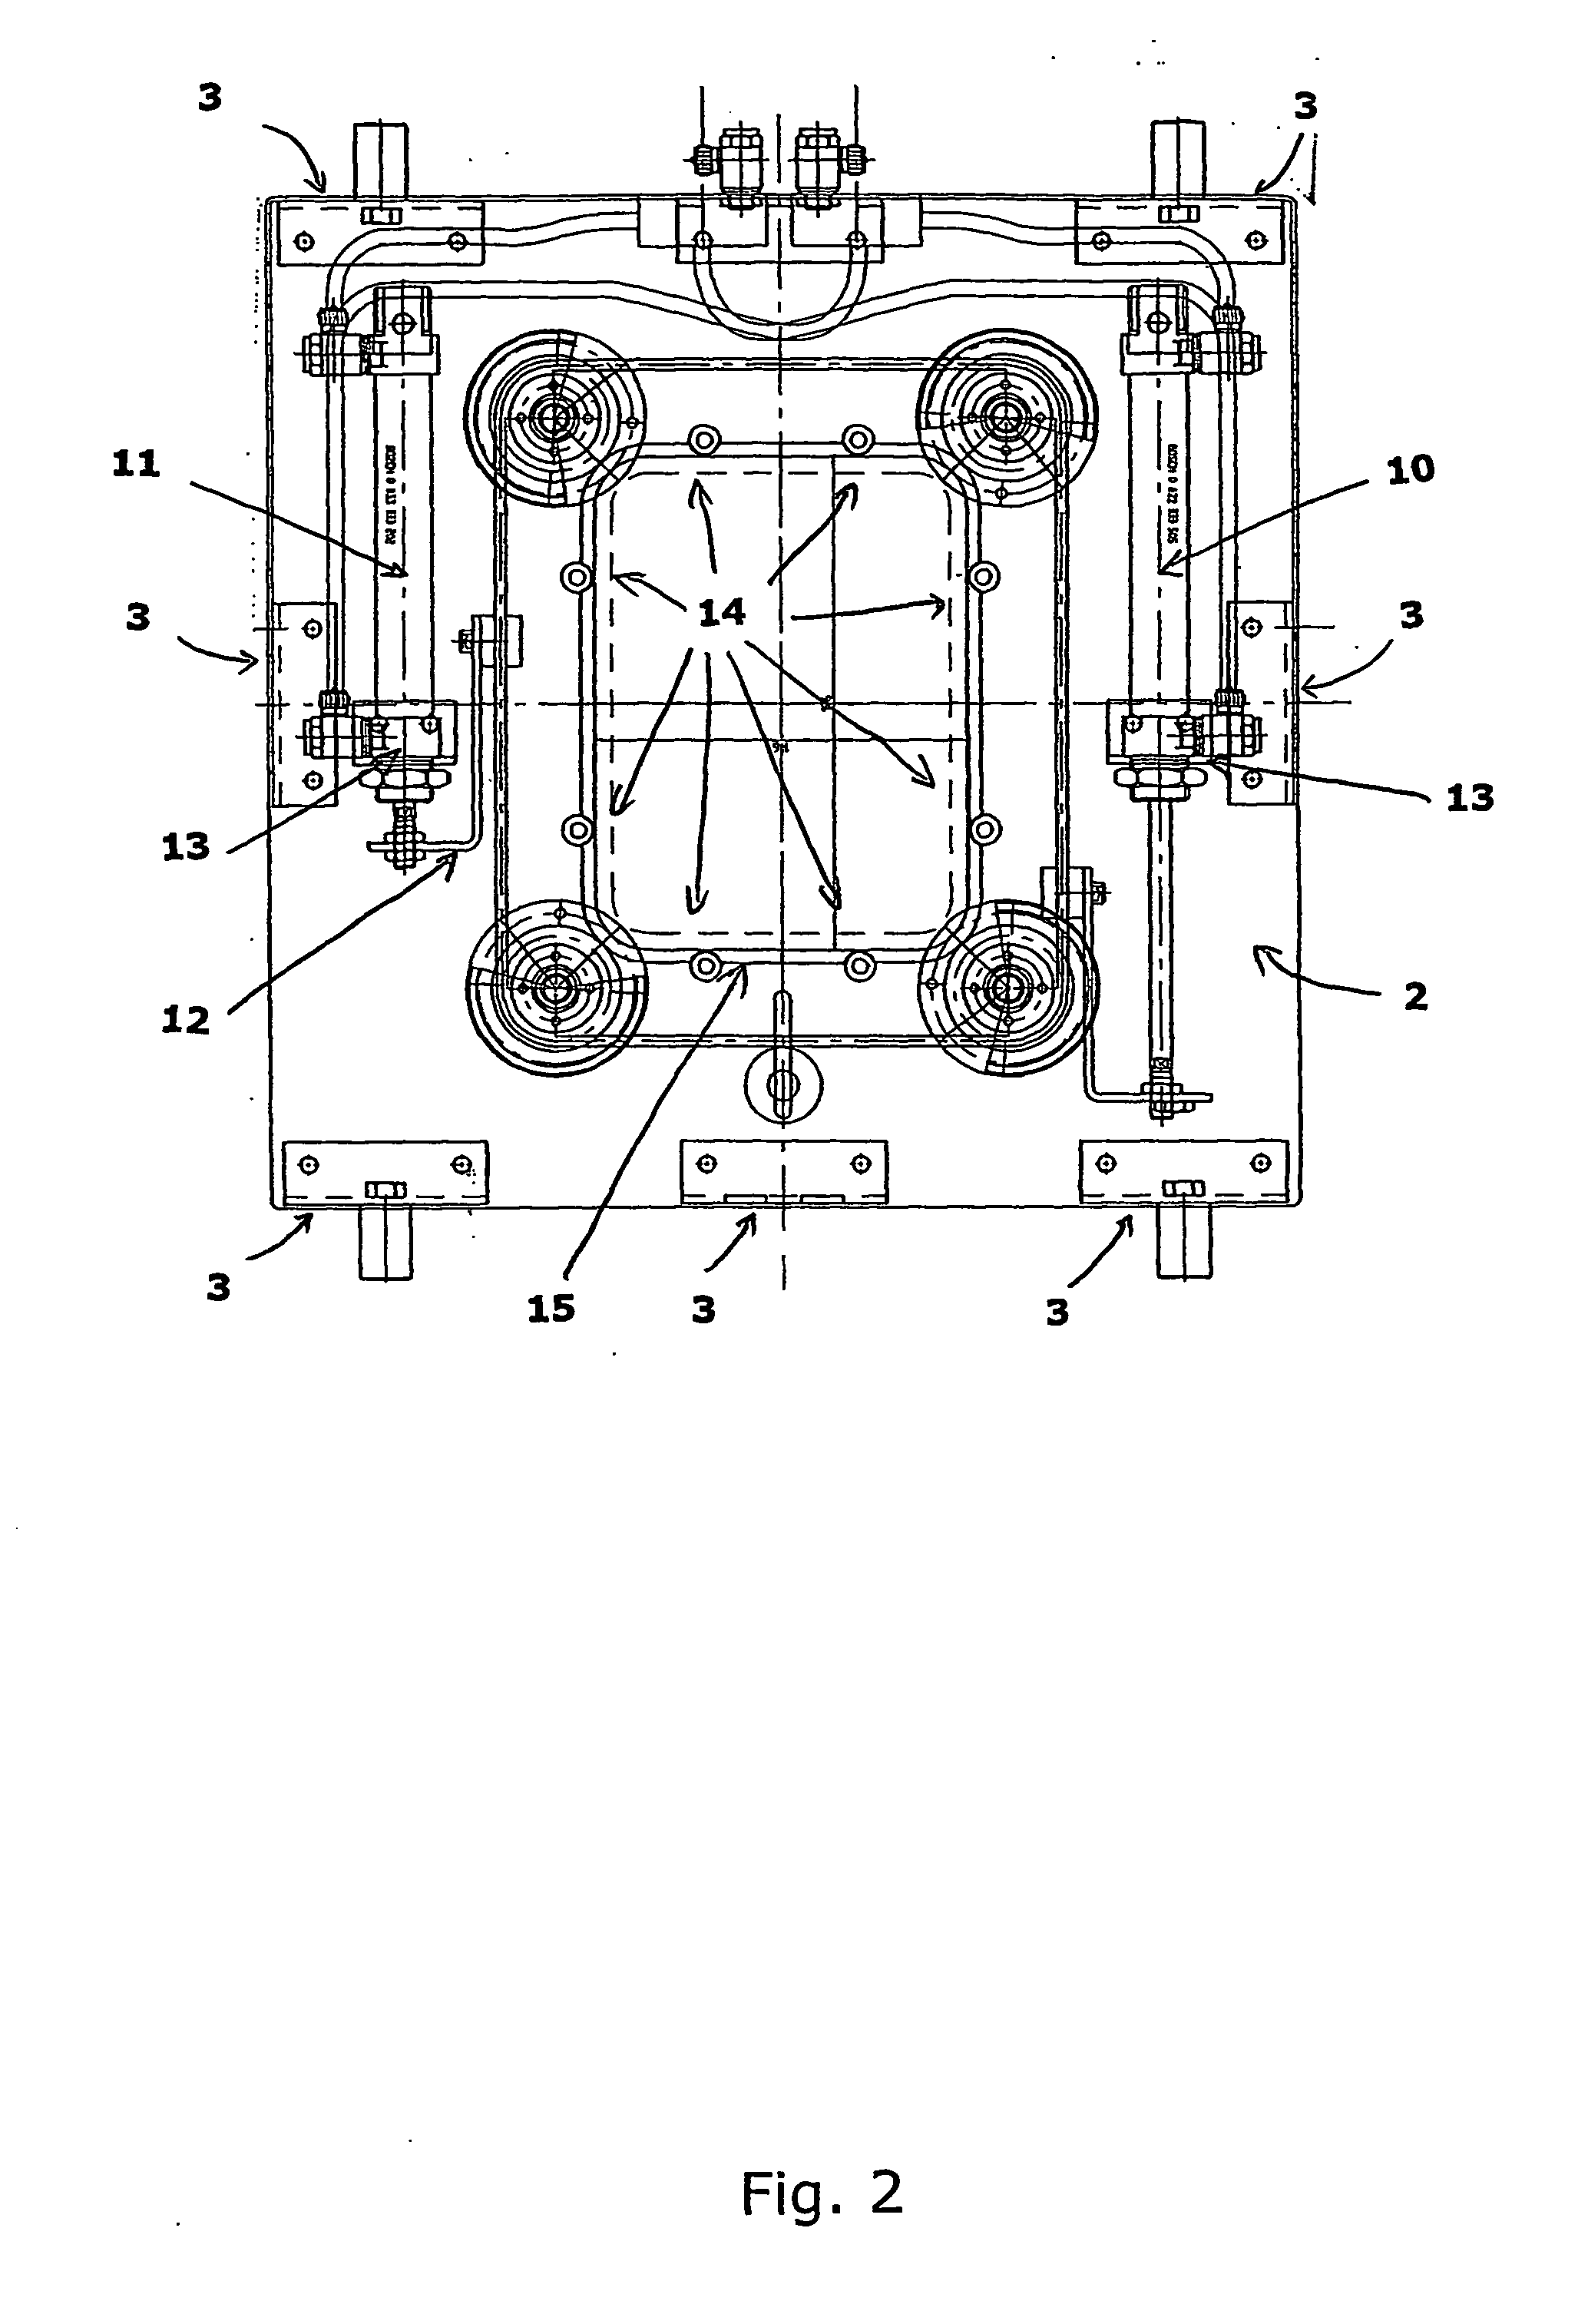 Apparatus for Dispensing of Stacked Objects, a Method for Dispensing Stacked Objects and a System Comprising an Apparatus for Dispensing